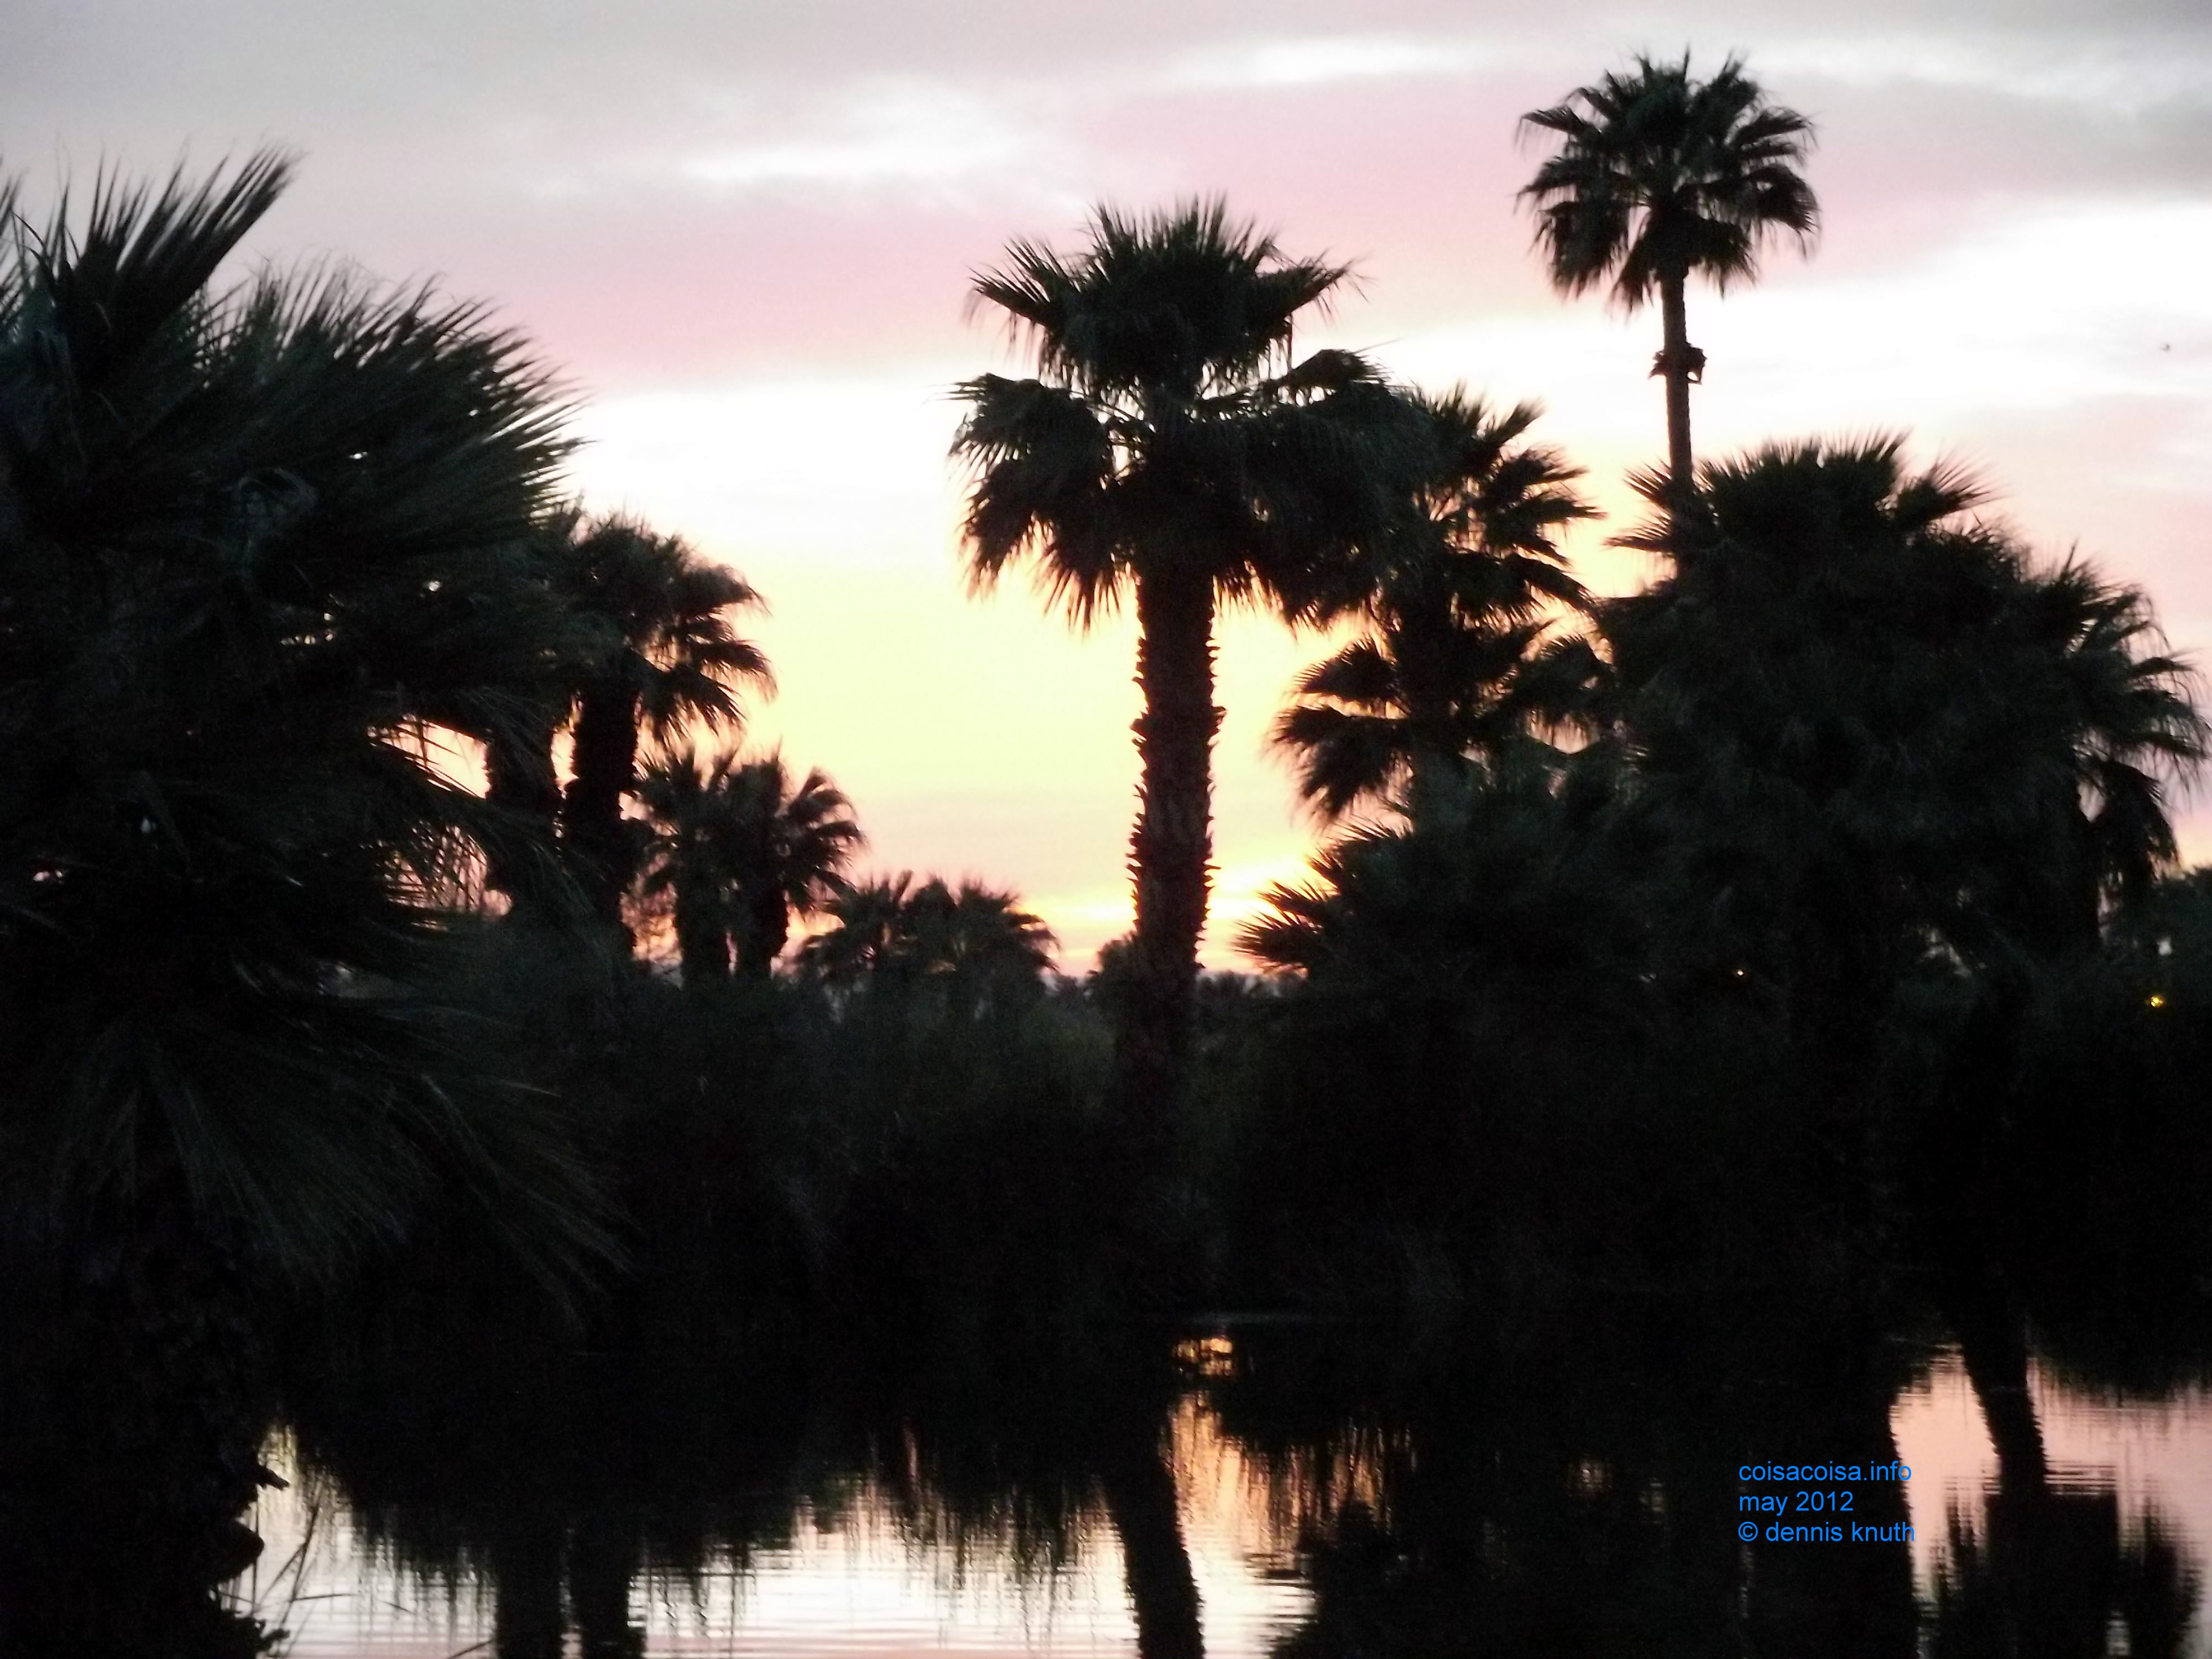 Papago Park Palms silhouetted by the setting sun